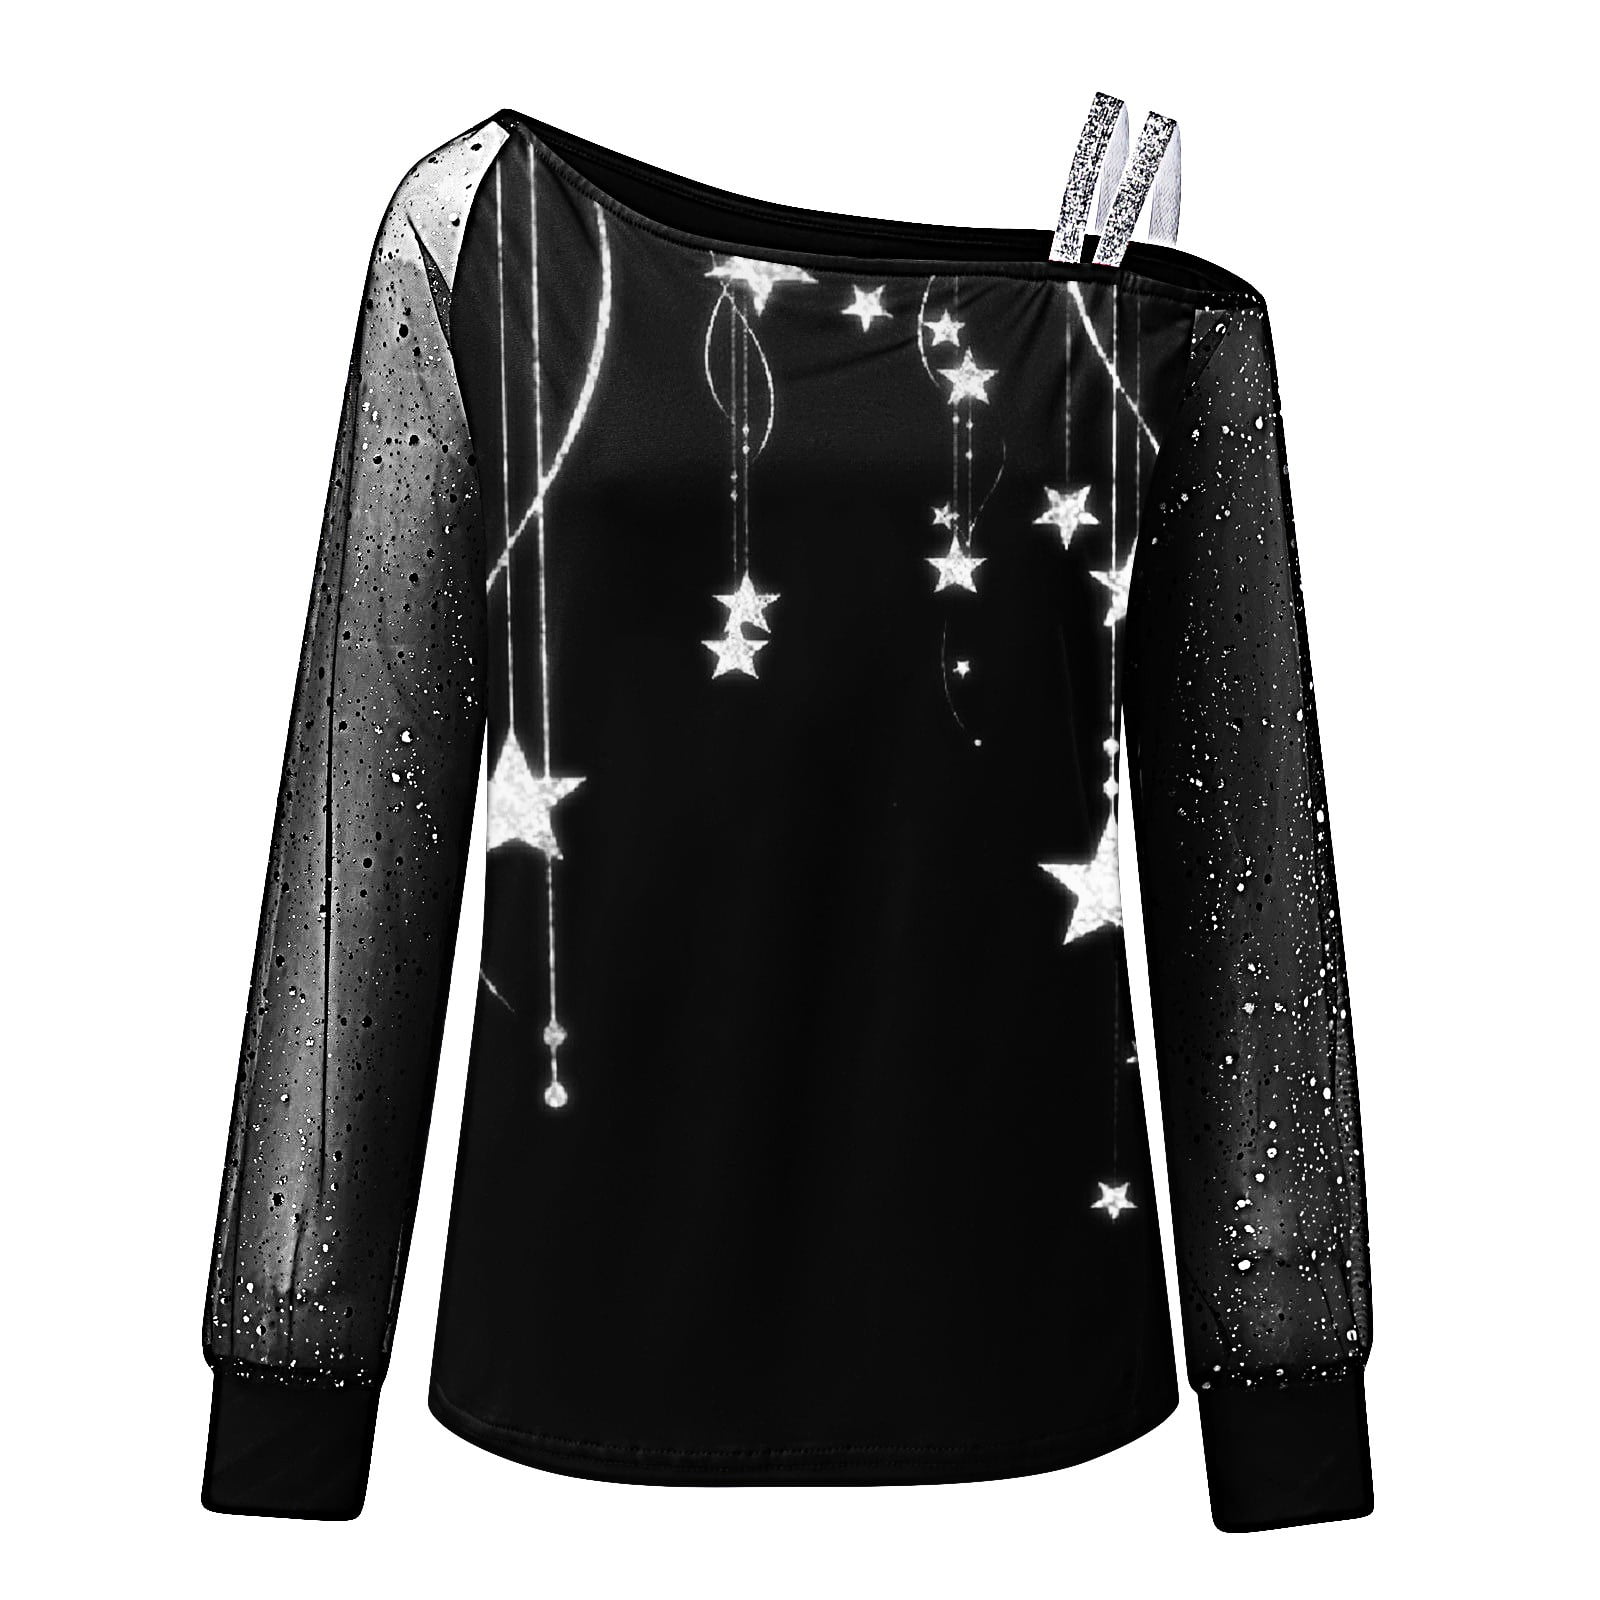 For Women T-Shirt,Silver Scoop Tops New Years Zipper Sleeve Eve Neck Mesh Cold Shoulder Gubotare Long Blouse Shirt Srtipe M Pullover Womens Casual